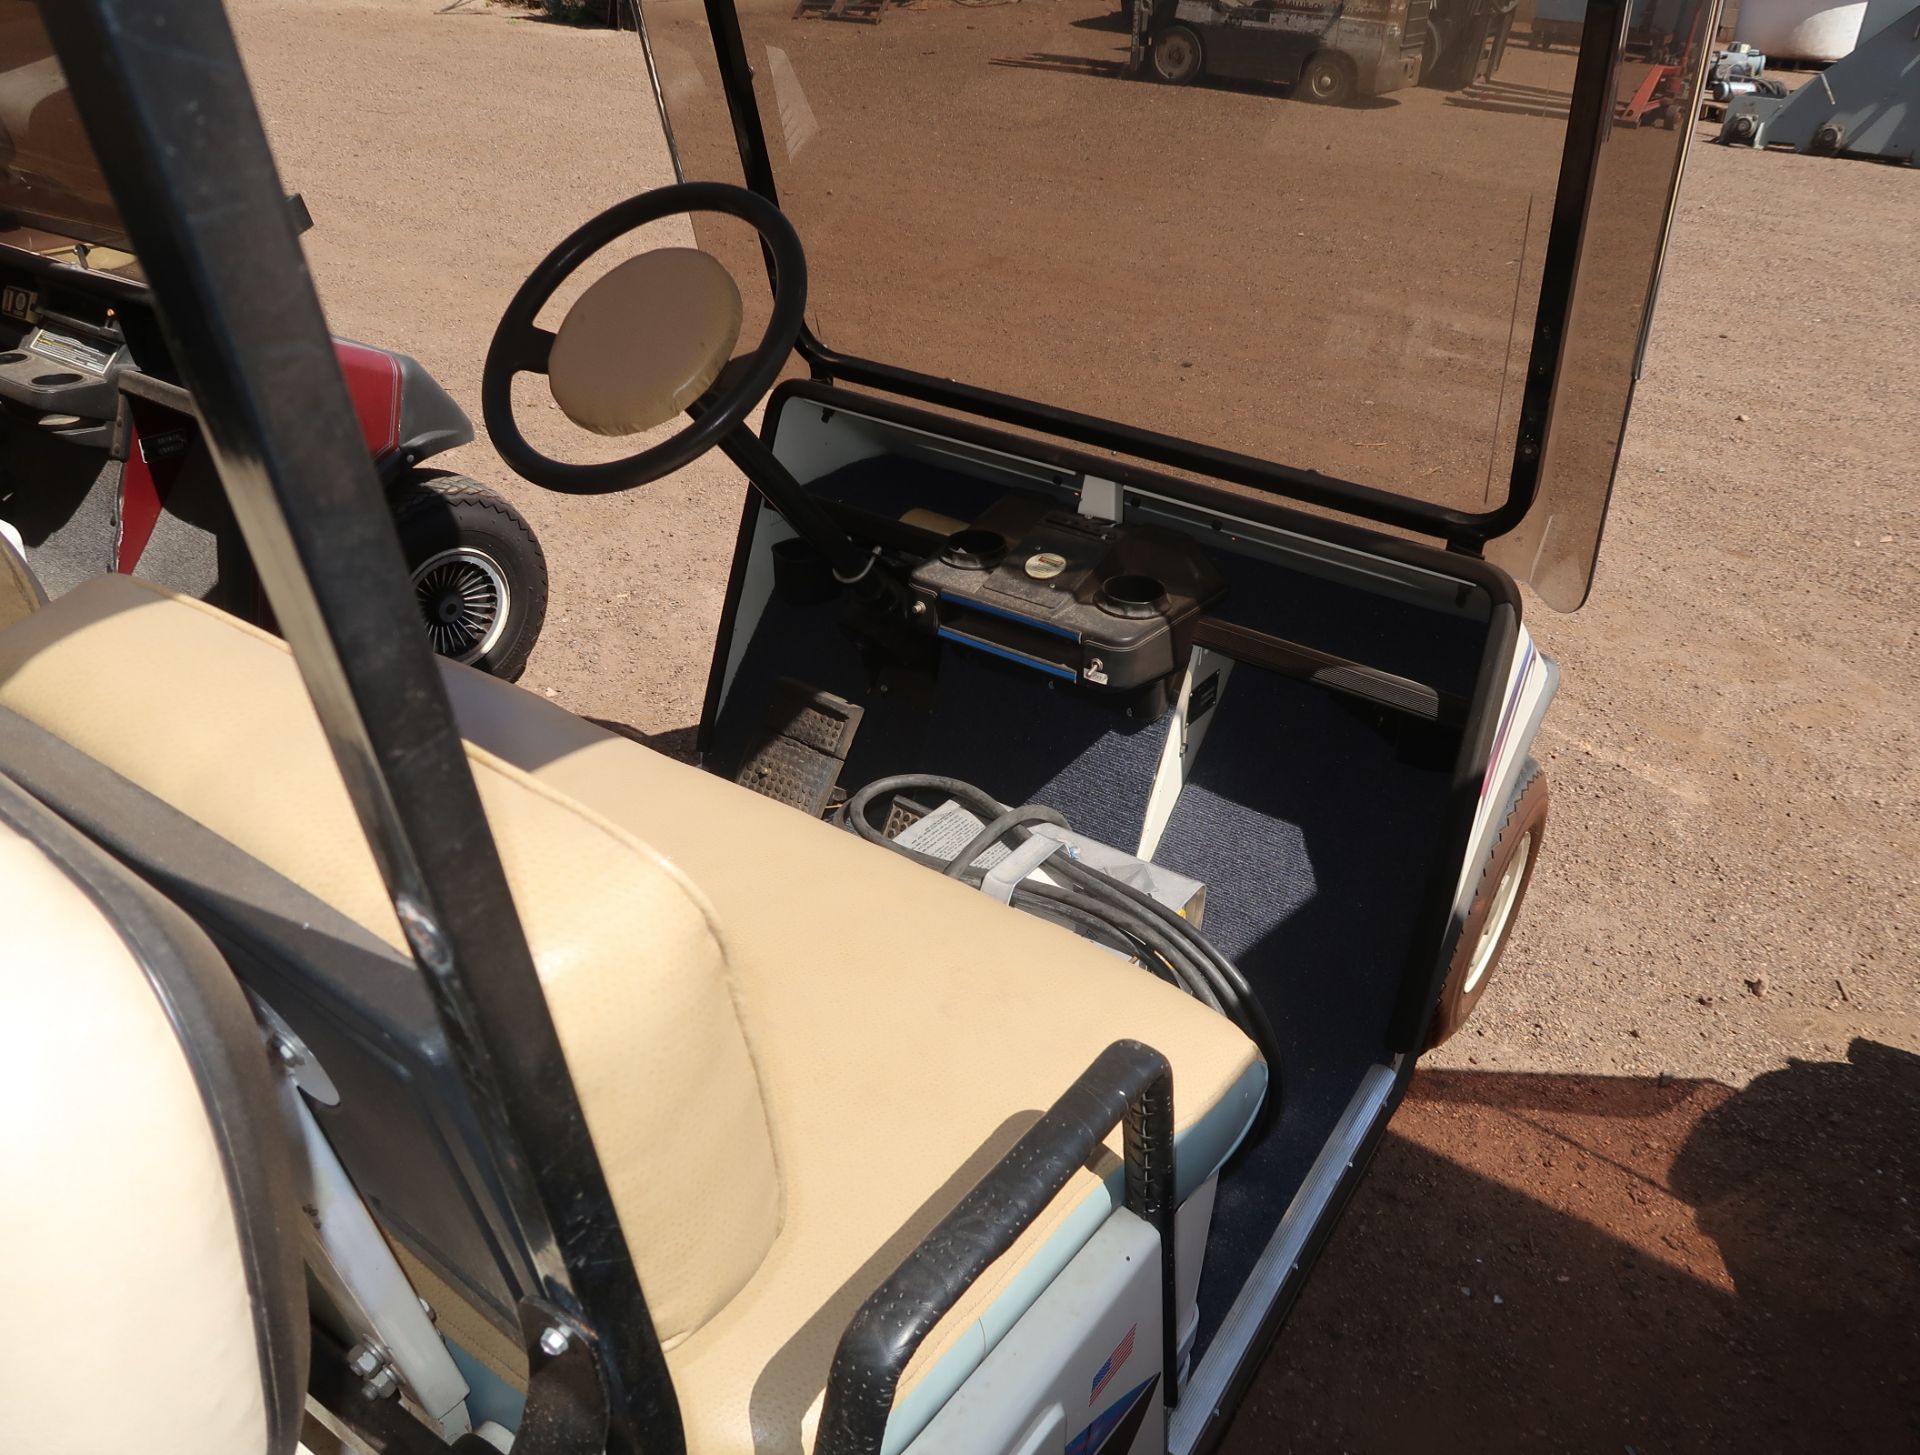 MELEX GOLFCART W/ CHARGER & BATTERIES, REAR SEAT MDL. 252 SN. 191992 (NO TITLE) - Image 3 of 10